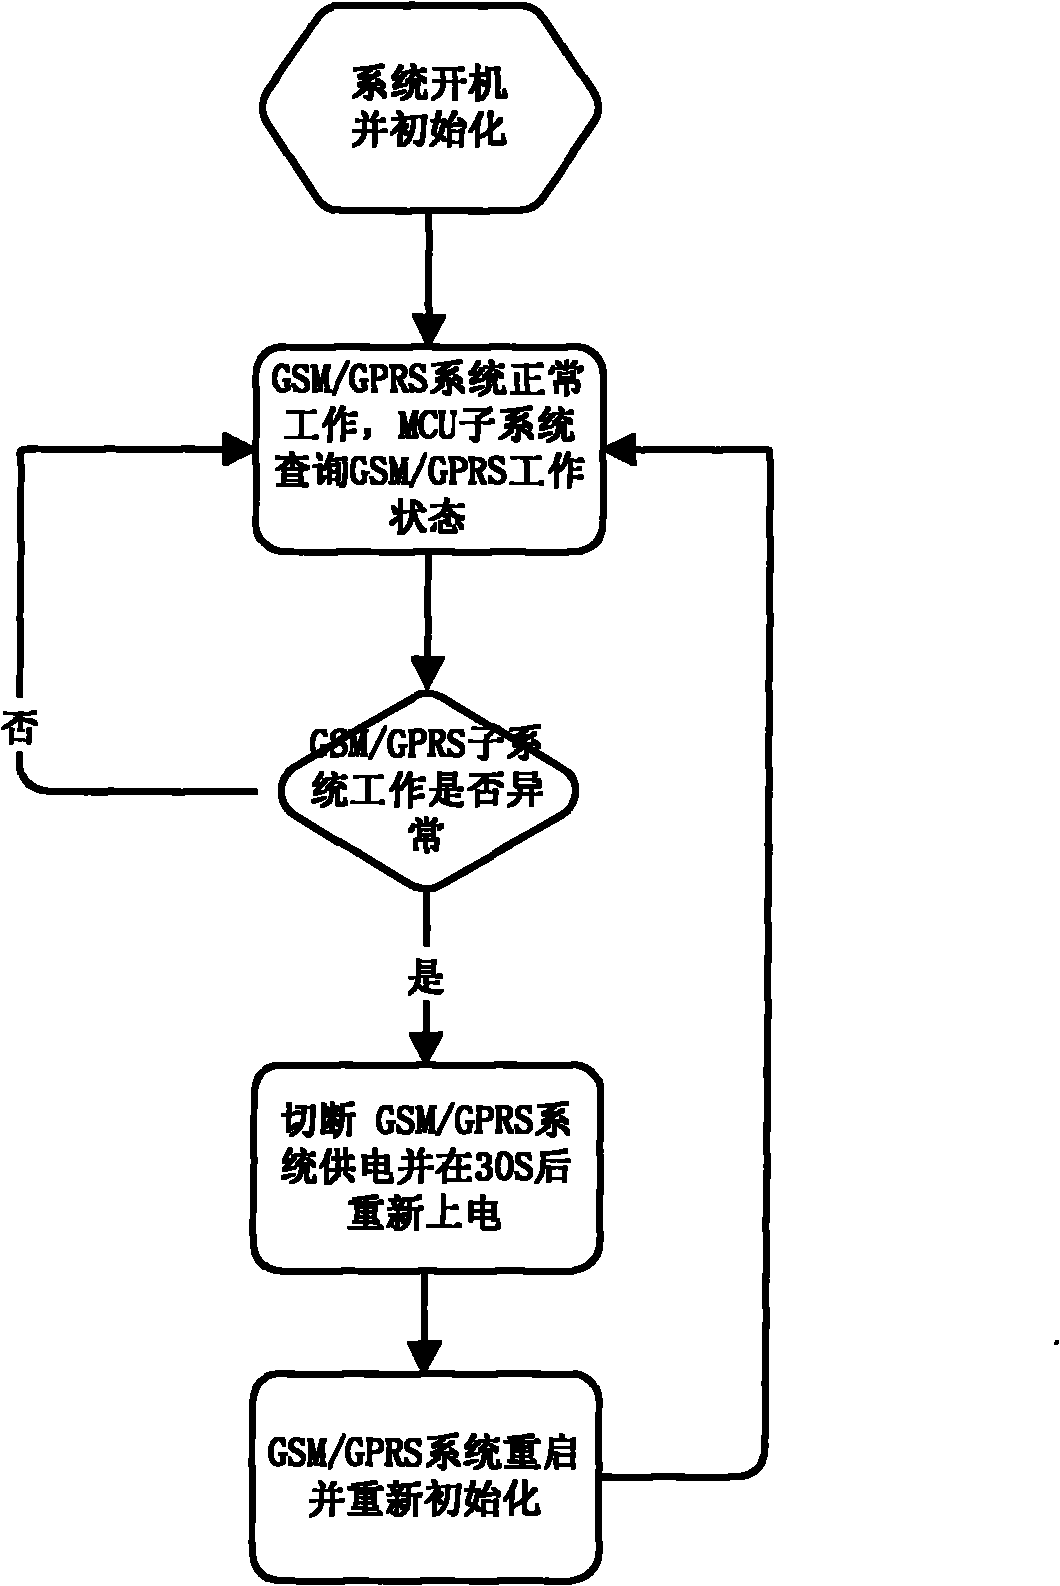 Power supply management method of vehicle security system